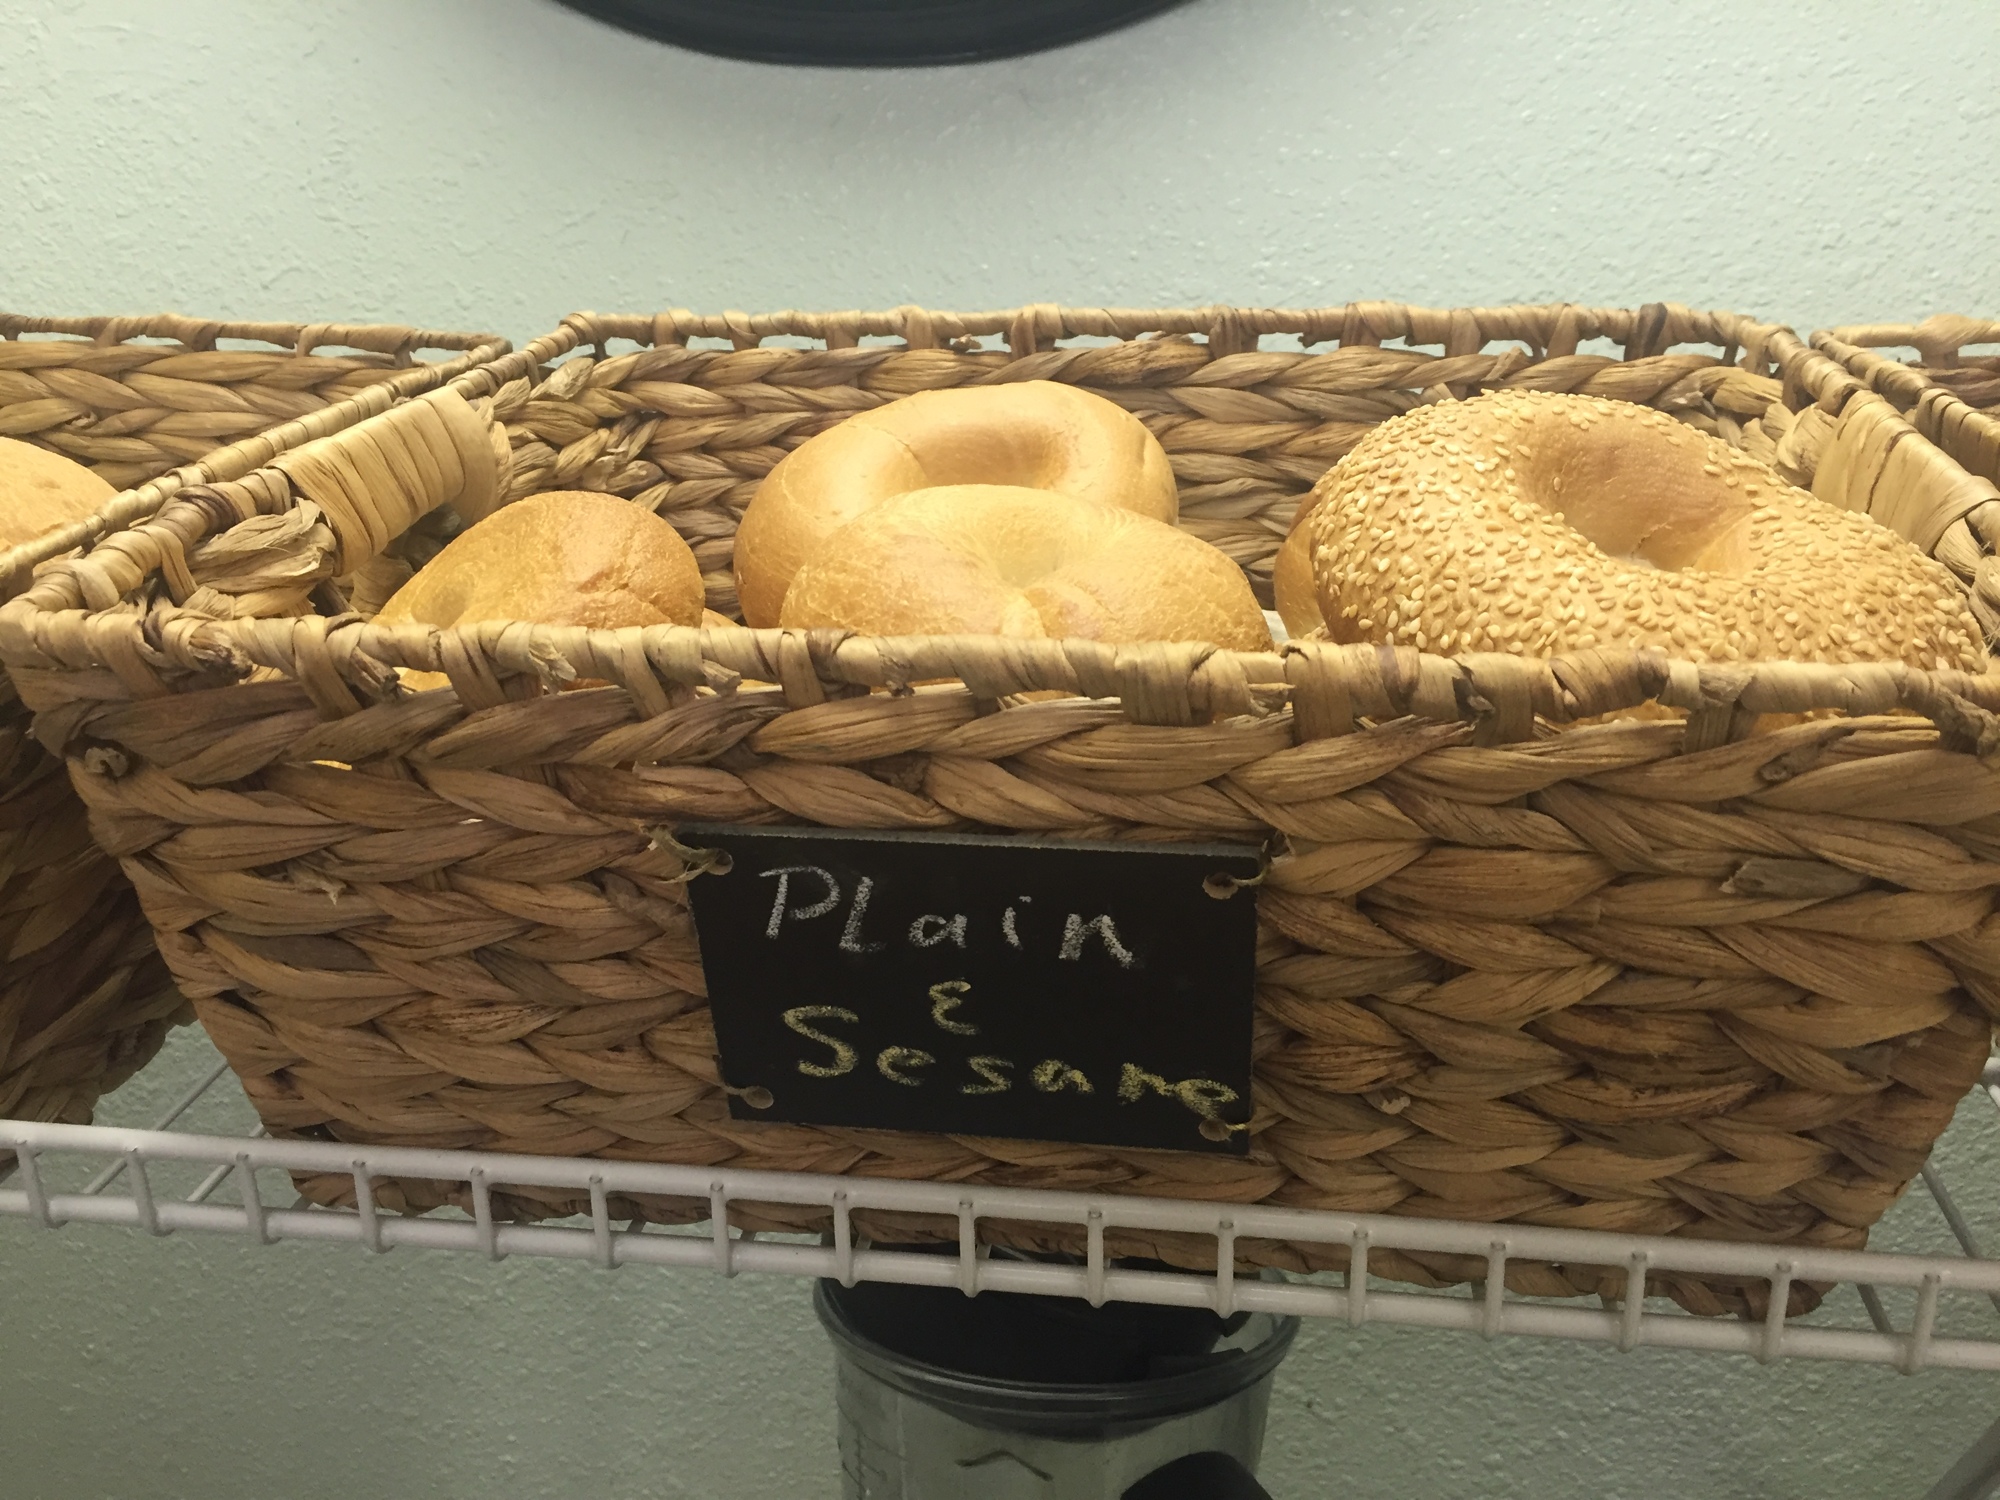 Simply Susanne’s Café serves bagels for $3, bagels and lox for $12 and bagels and whitefish for $8.25.